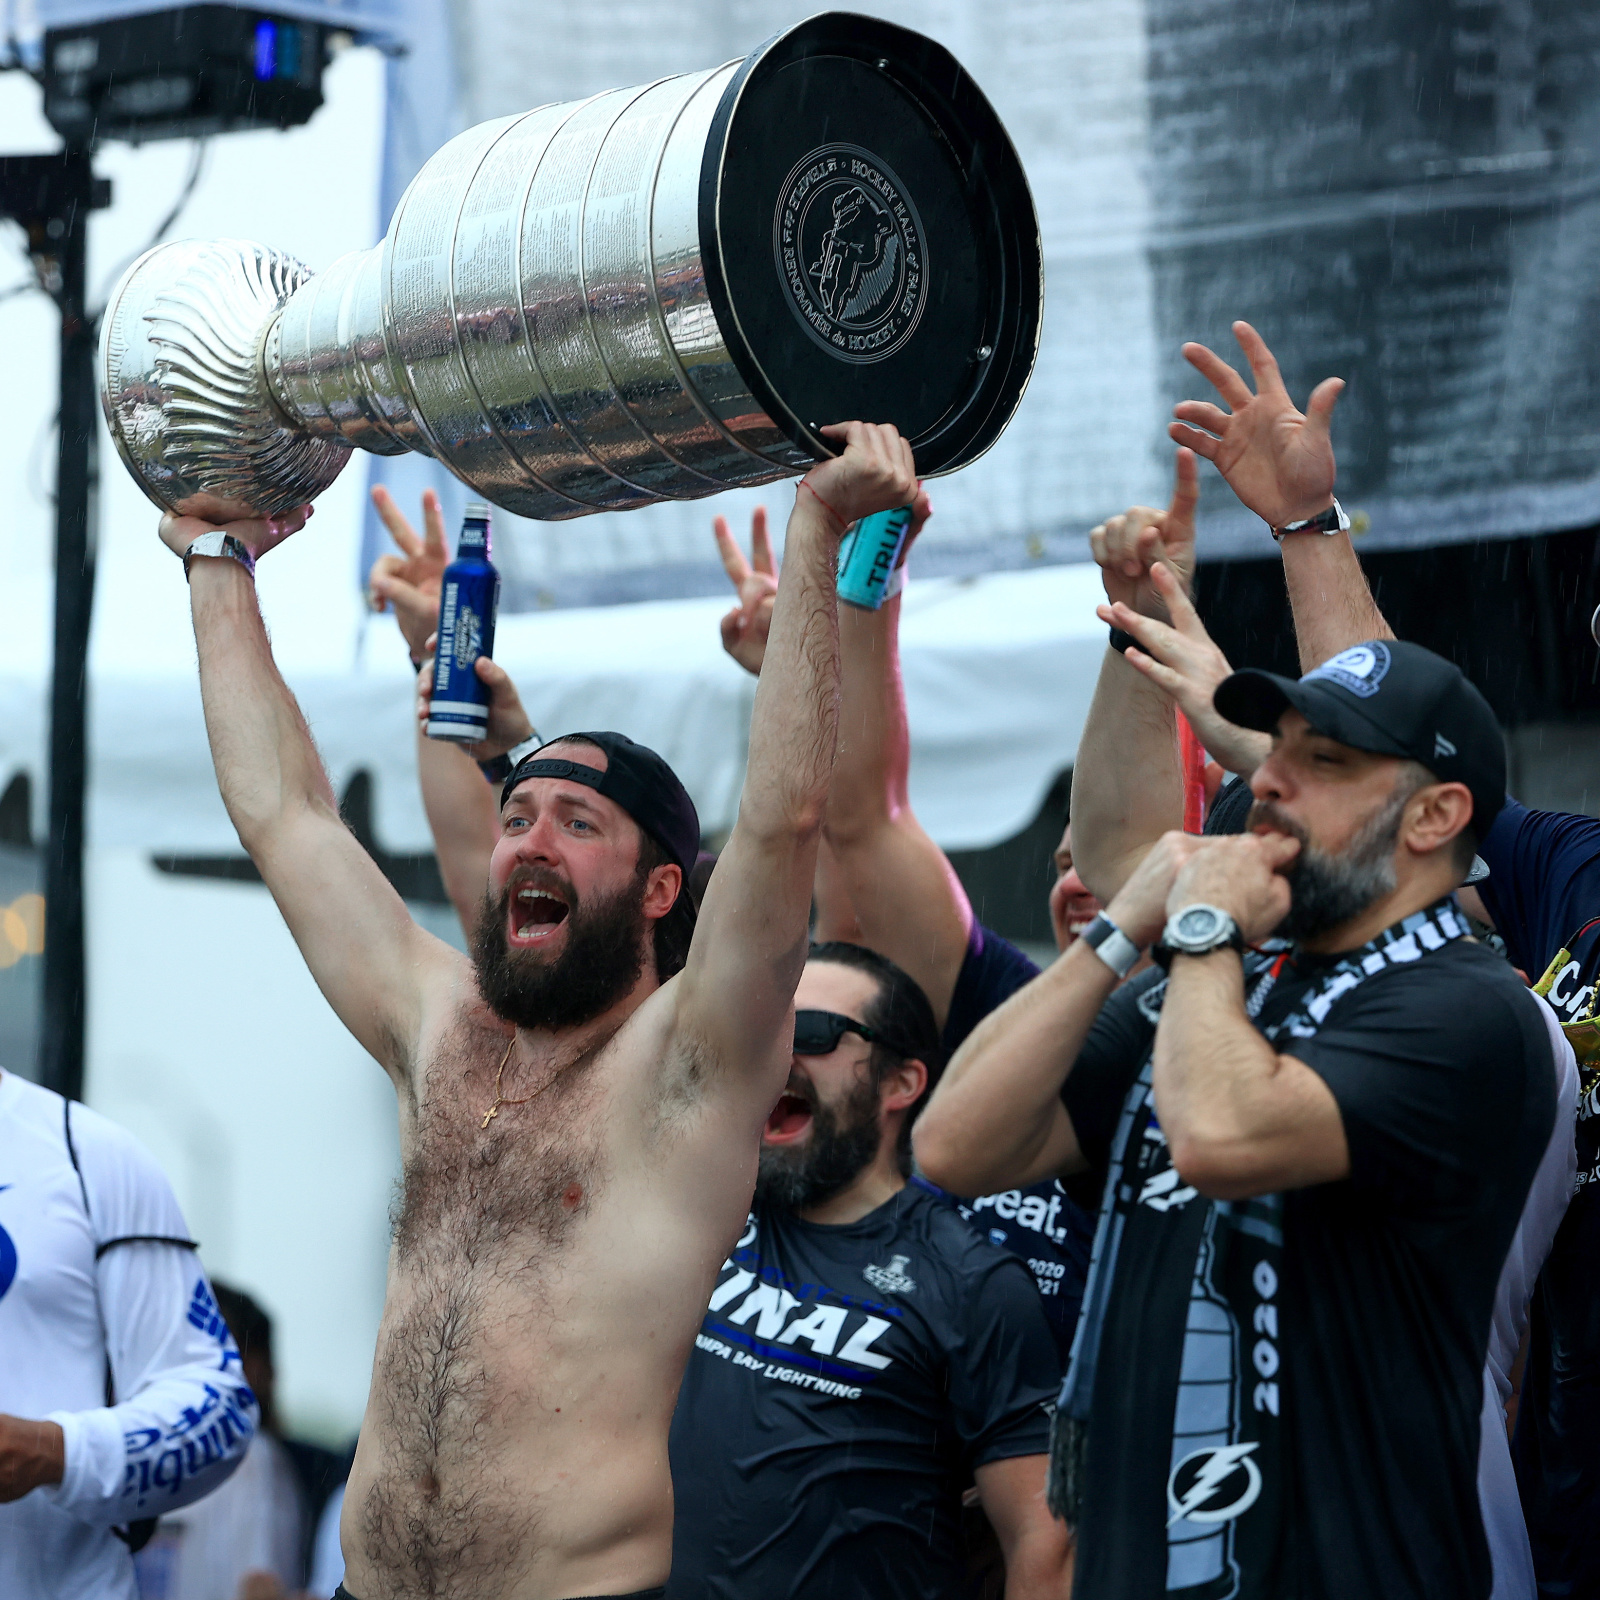 Stanley Cup needs repair after getting dented during the Tampa Bay  Lightning's boat parade – Orlando Sentinel